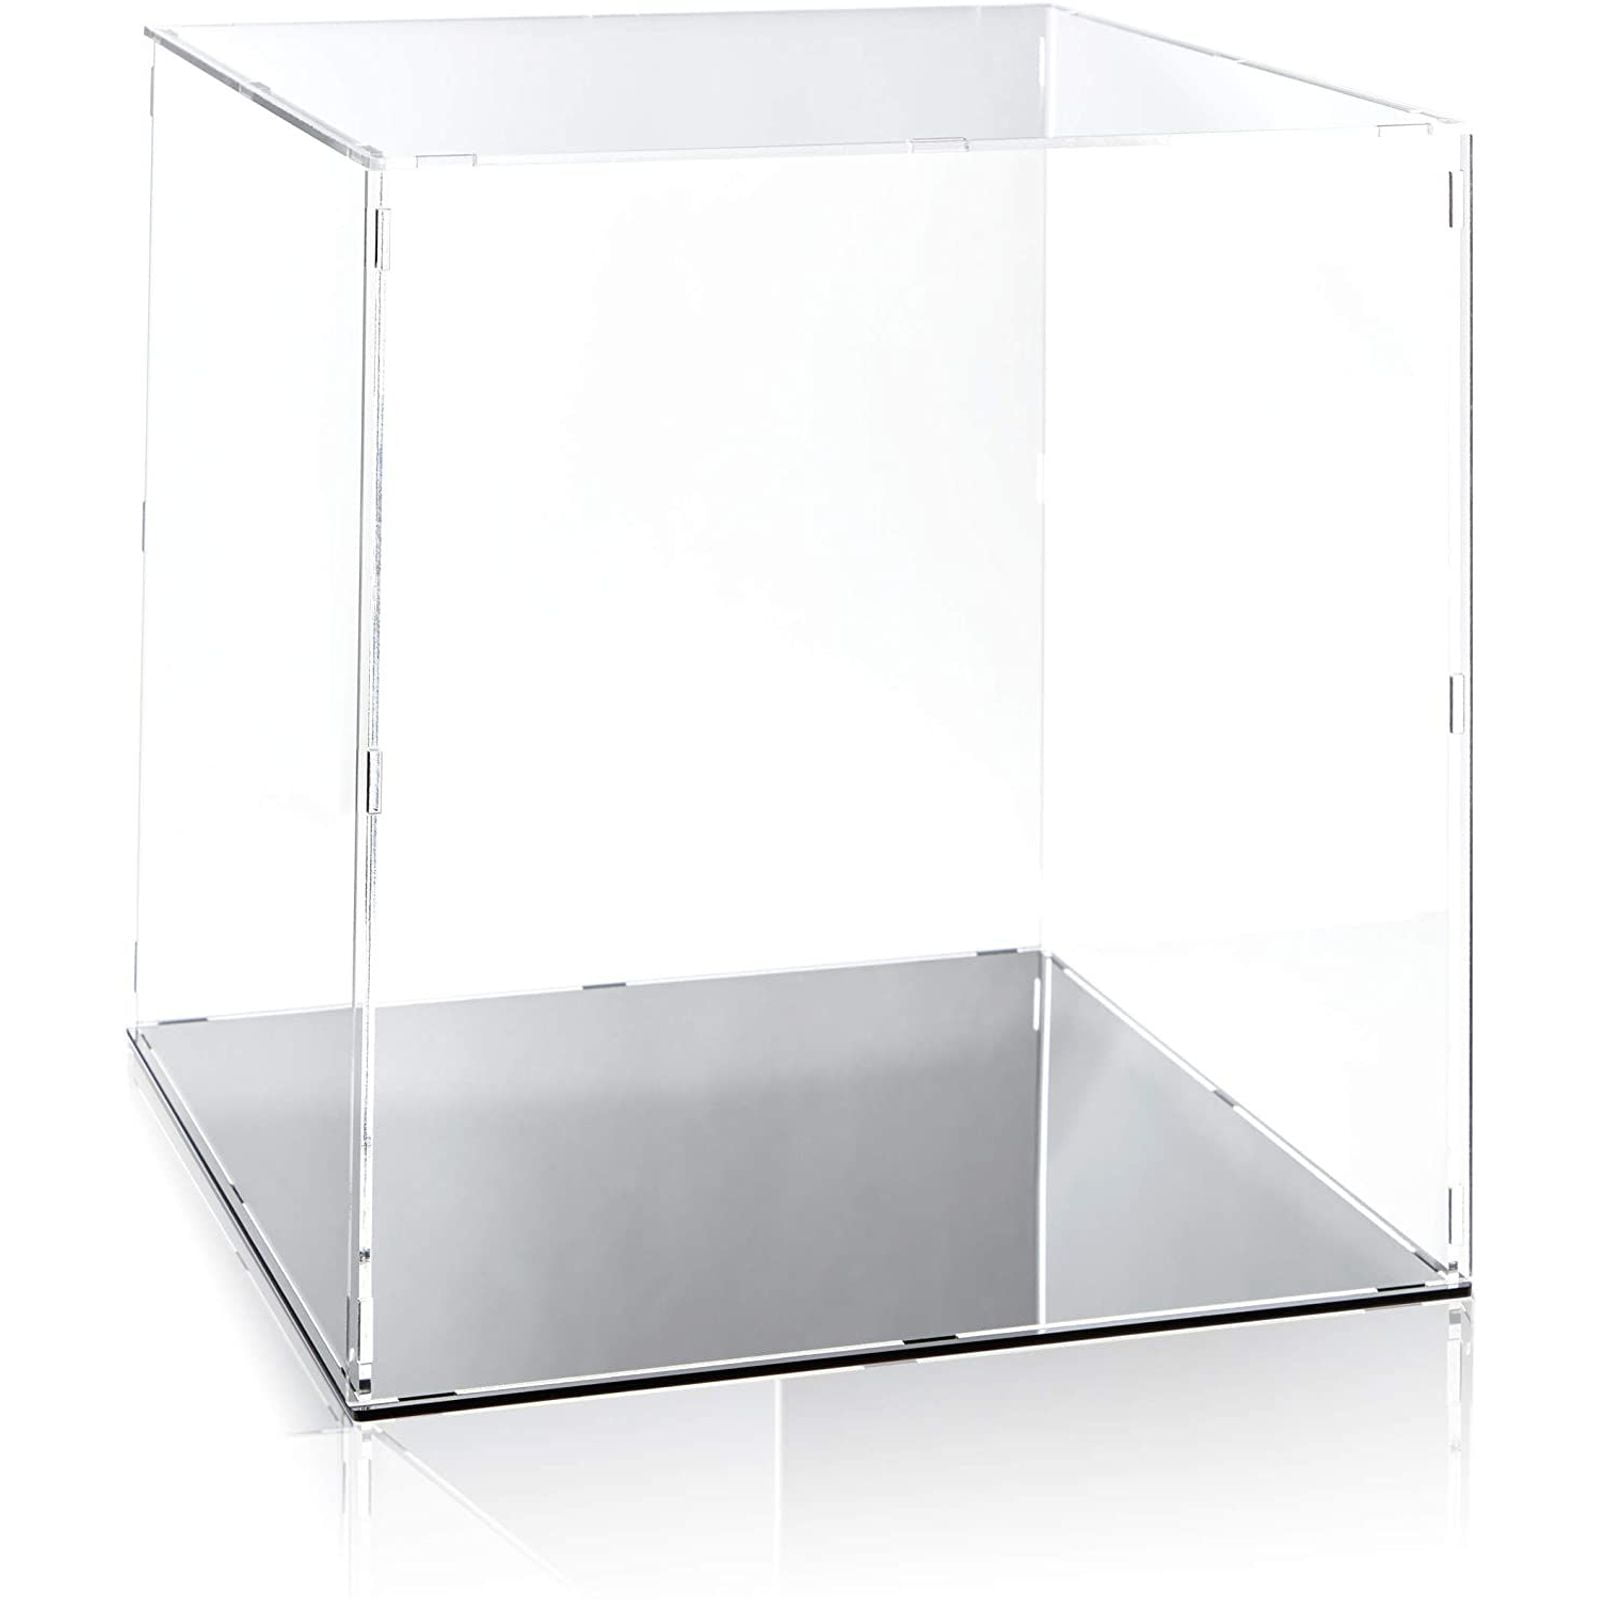 Large Acrylic Display Box Collectible Display Case Clear Store Display 12"x12x12 